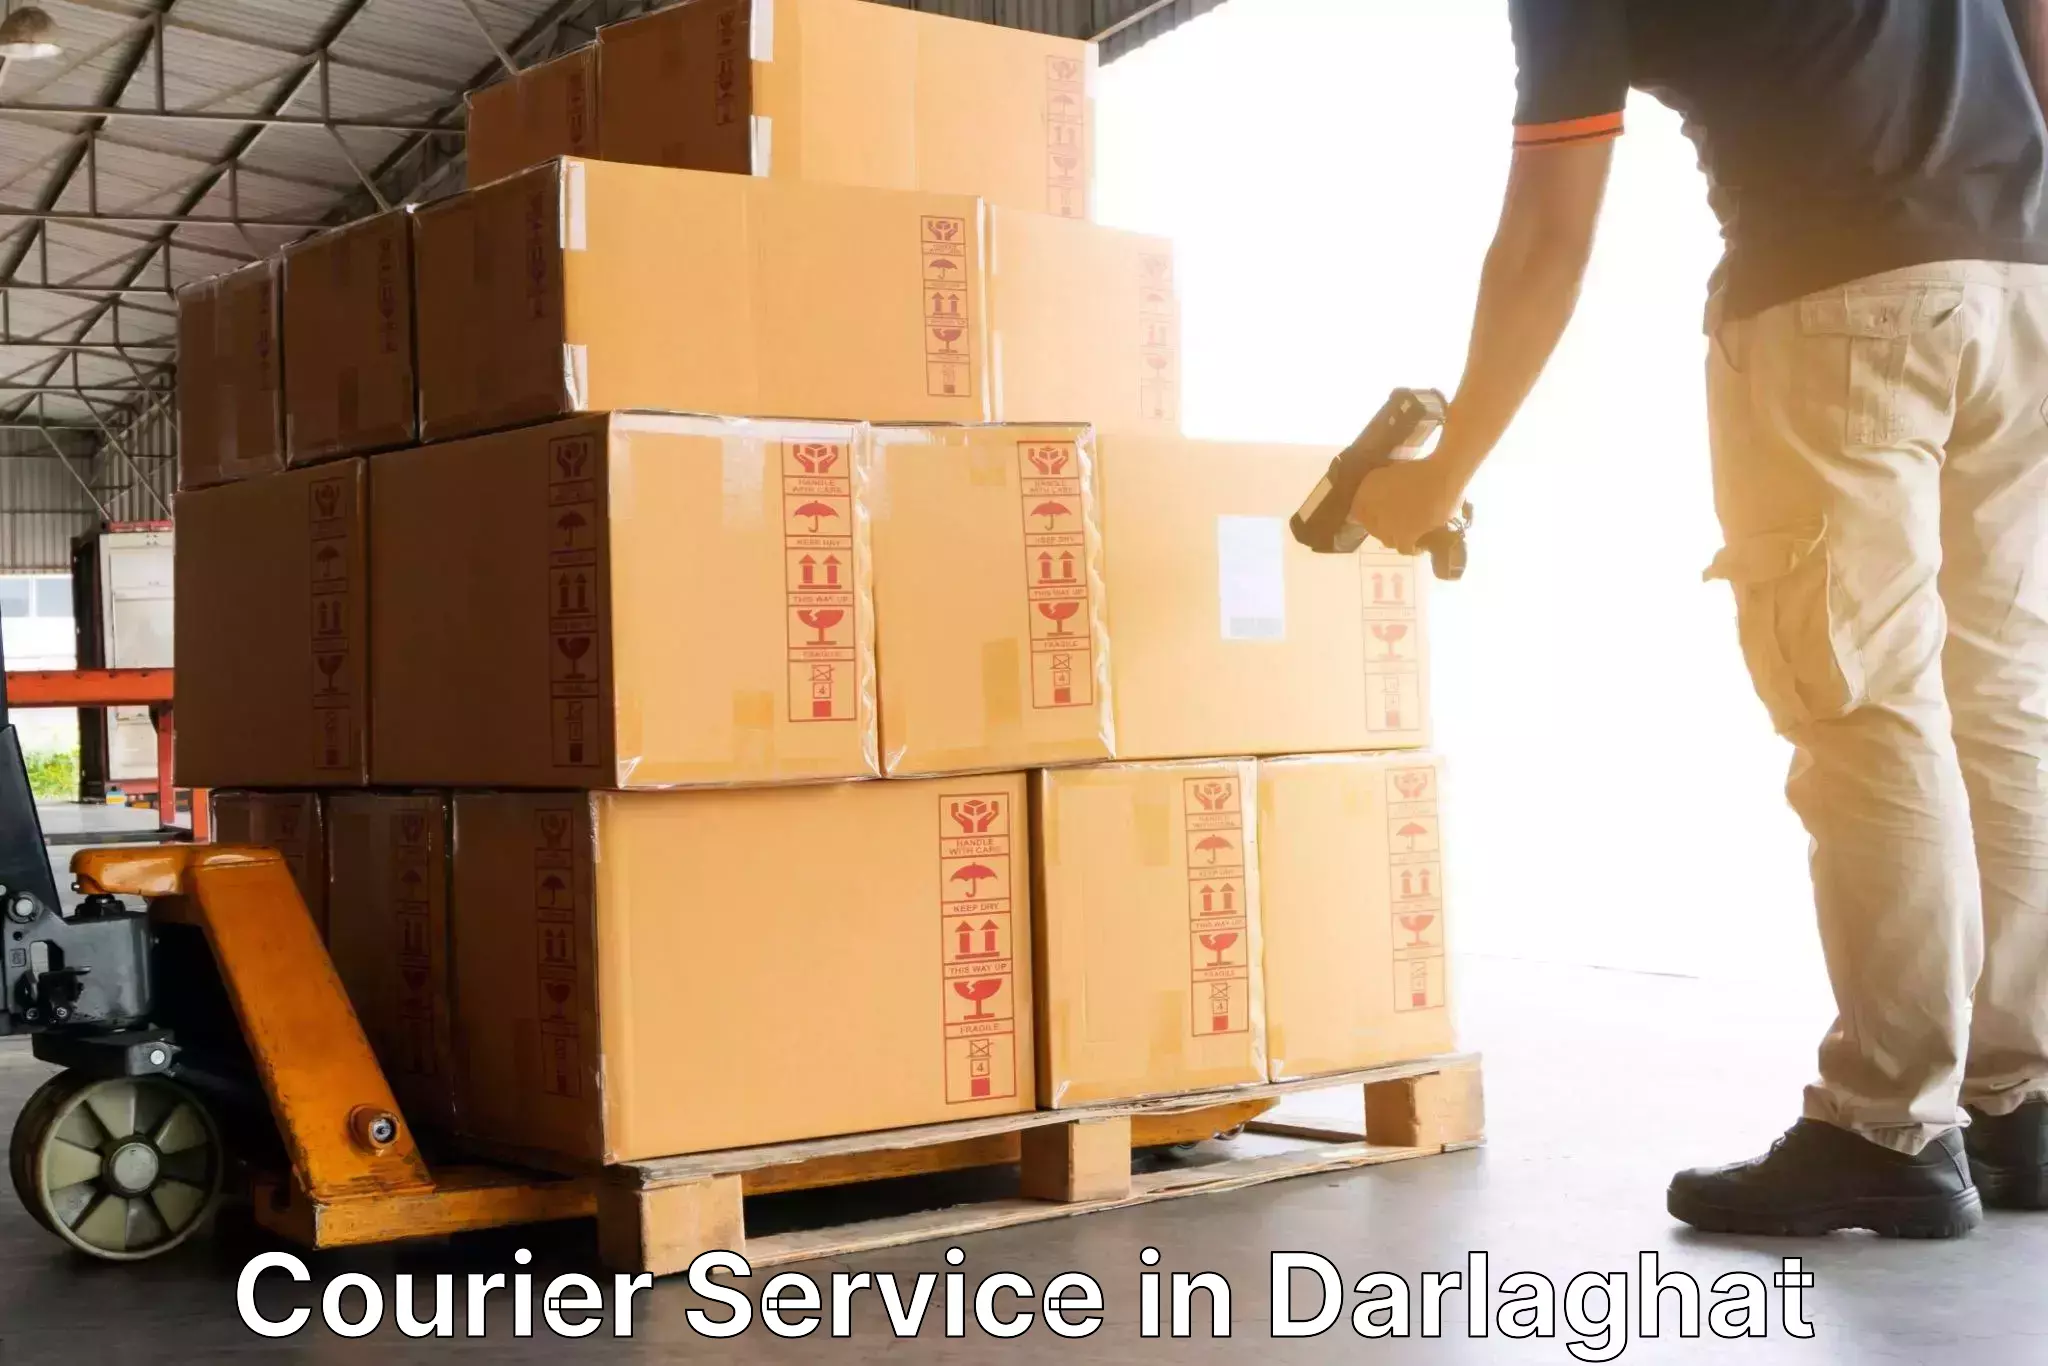 Postal and courier services in Darlaghat